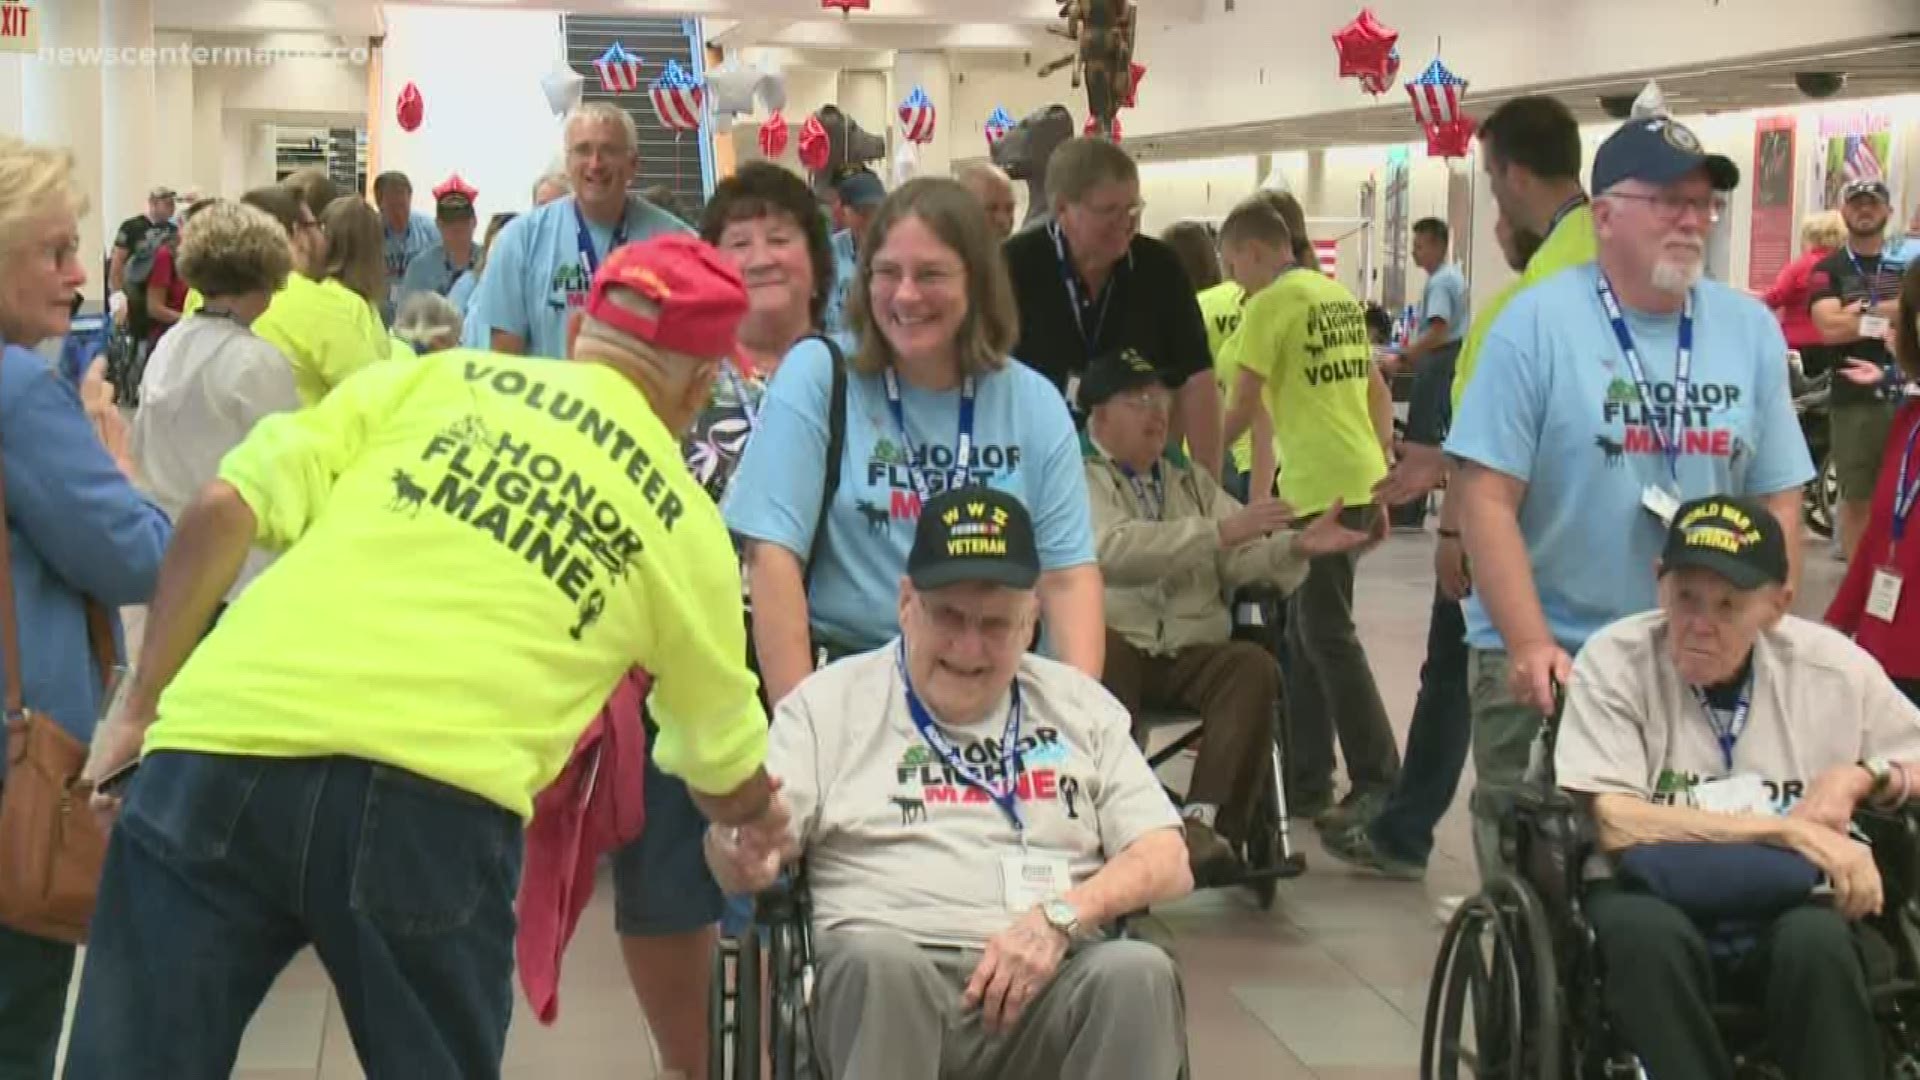 Thirty-three veterans are headed to our nation's capital thanks to Honor Flight Maine to see the monuments built to pay tribute to them.